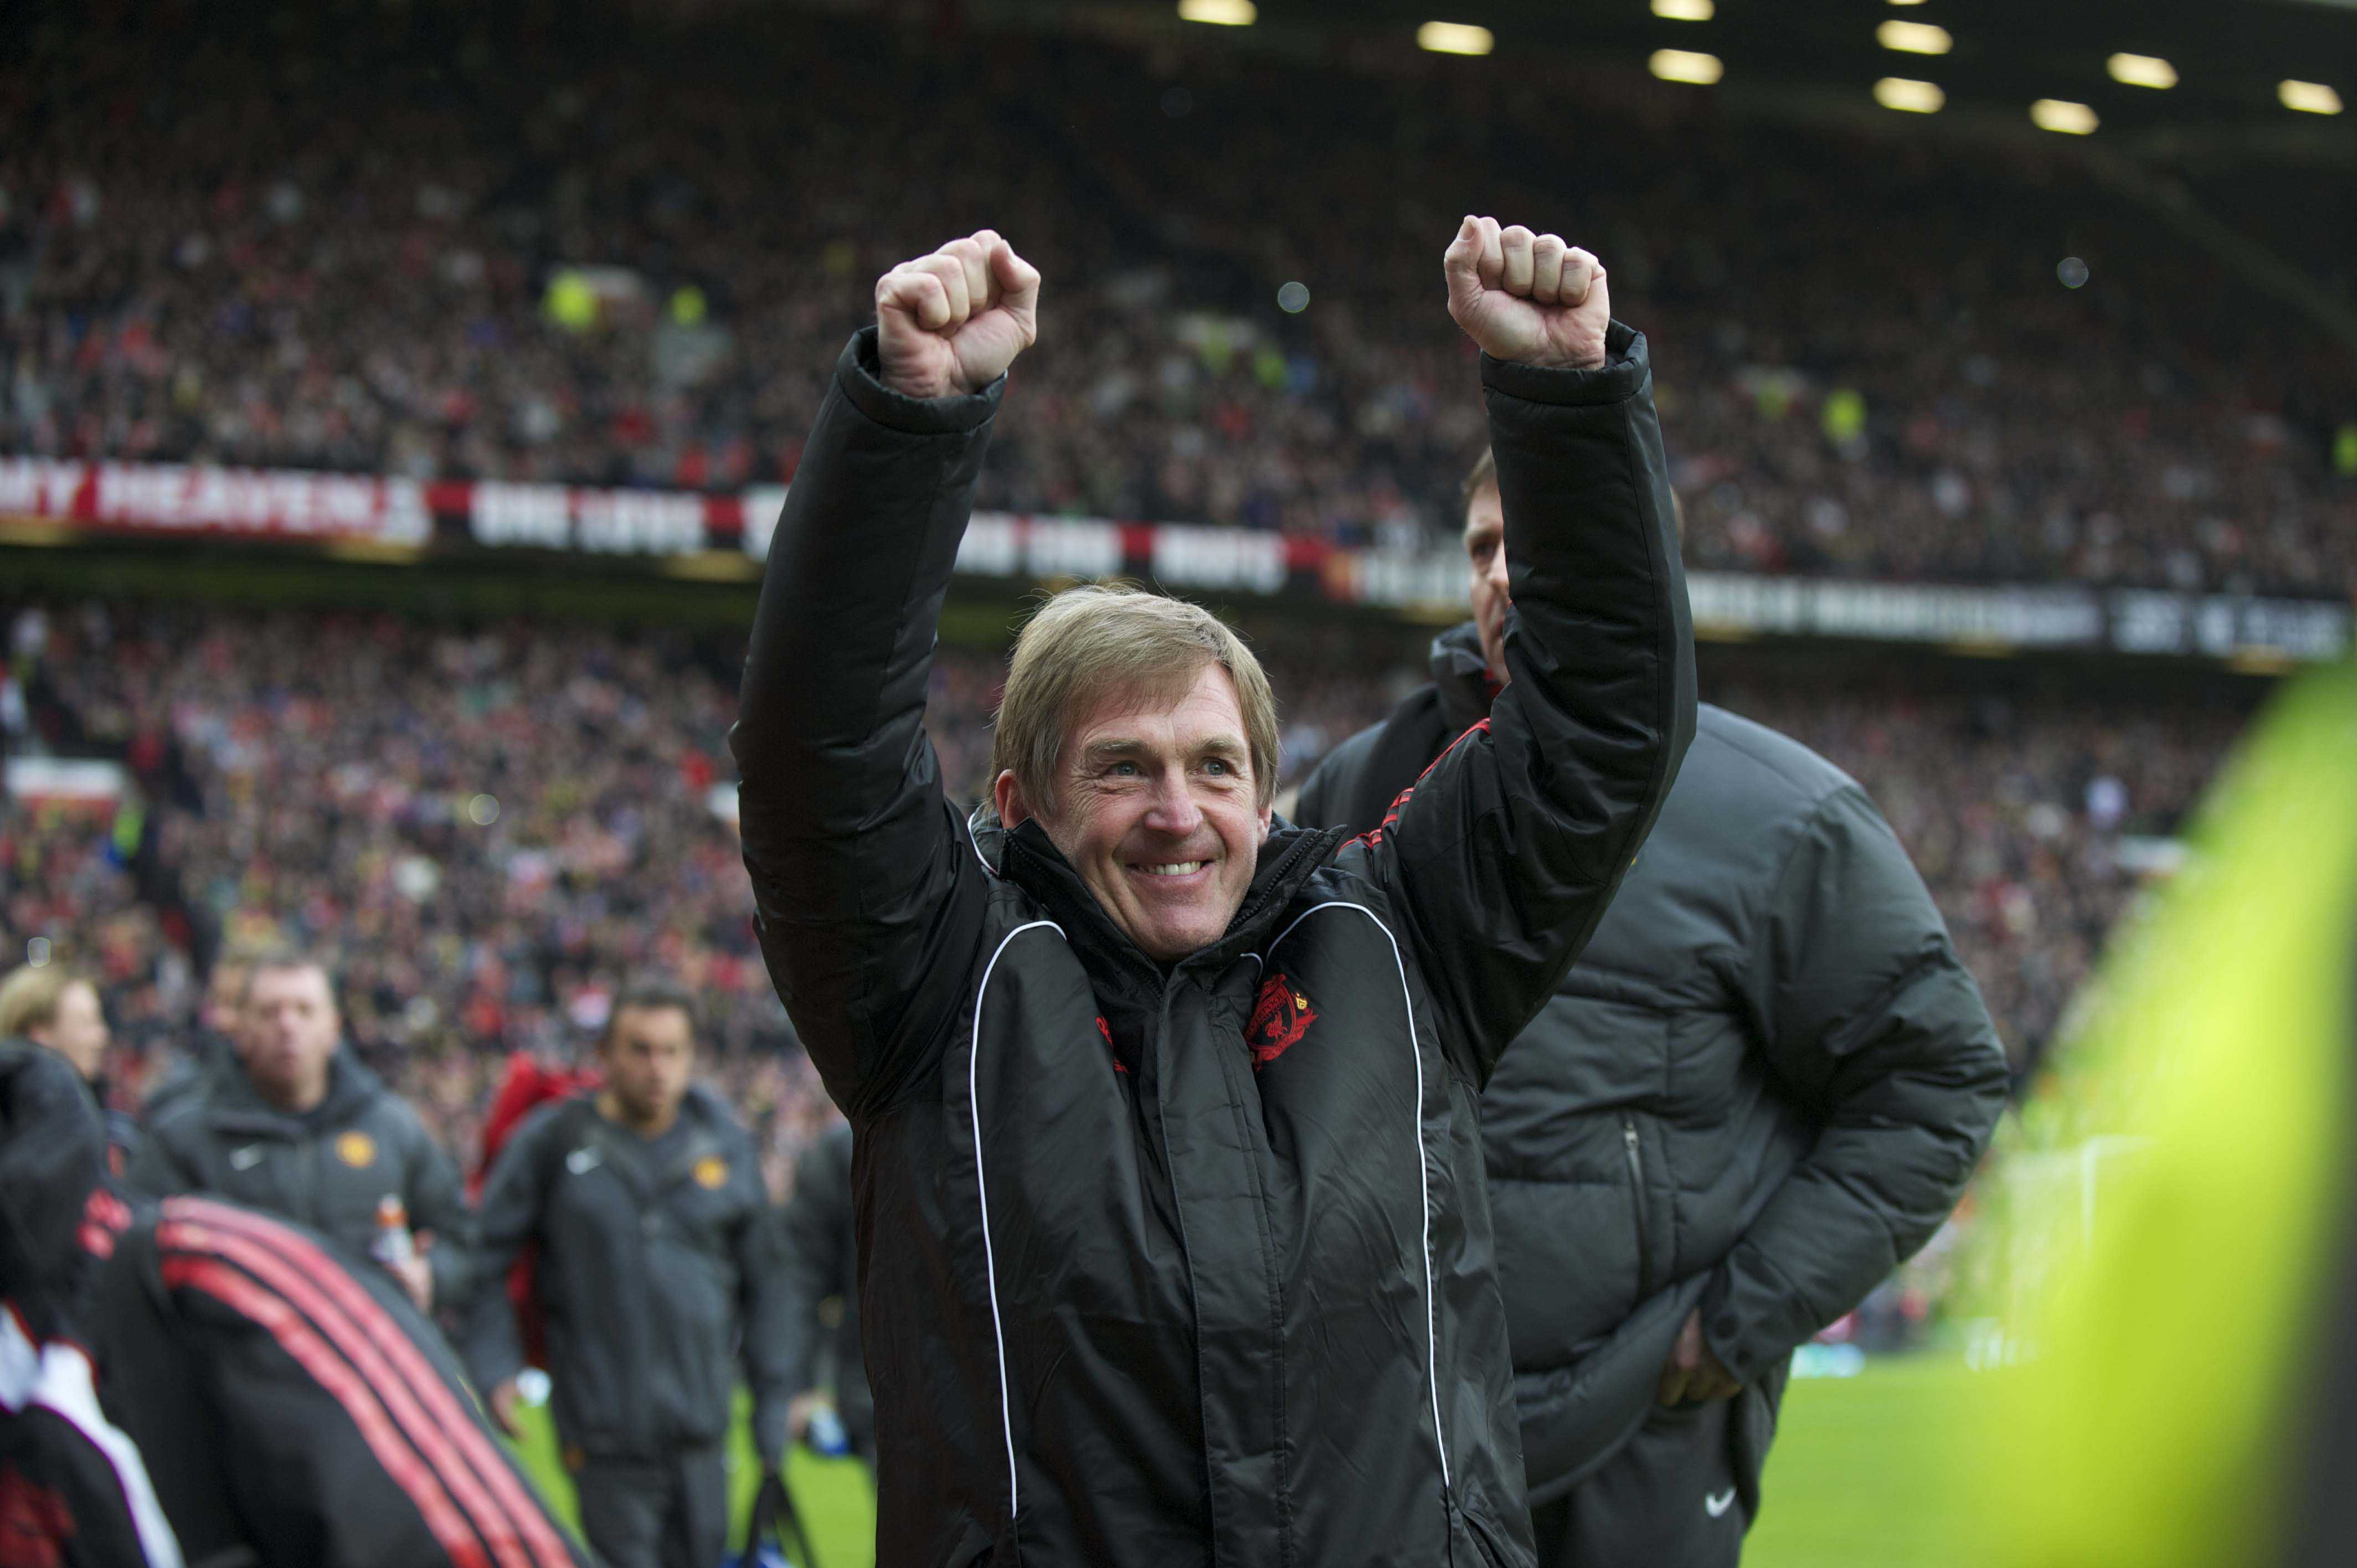 Liverpool: Kenny Dalglish – As Player Manager And Legend “An Absolute Pleasure”